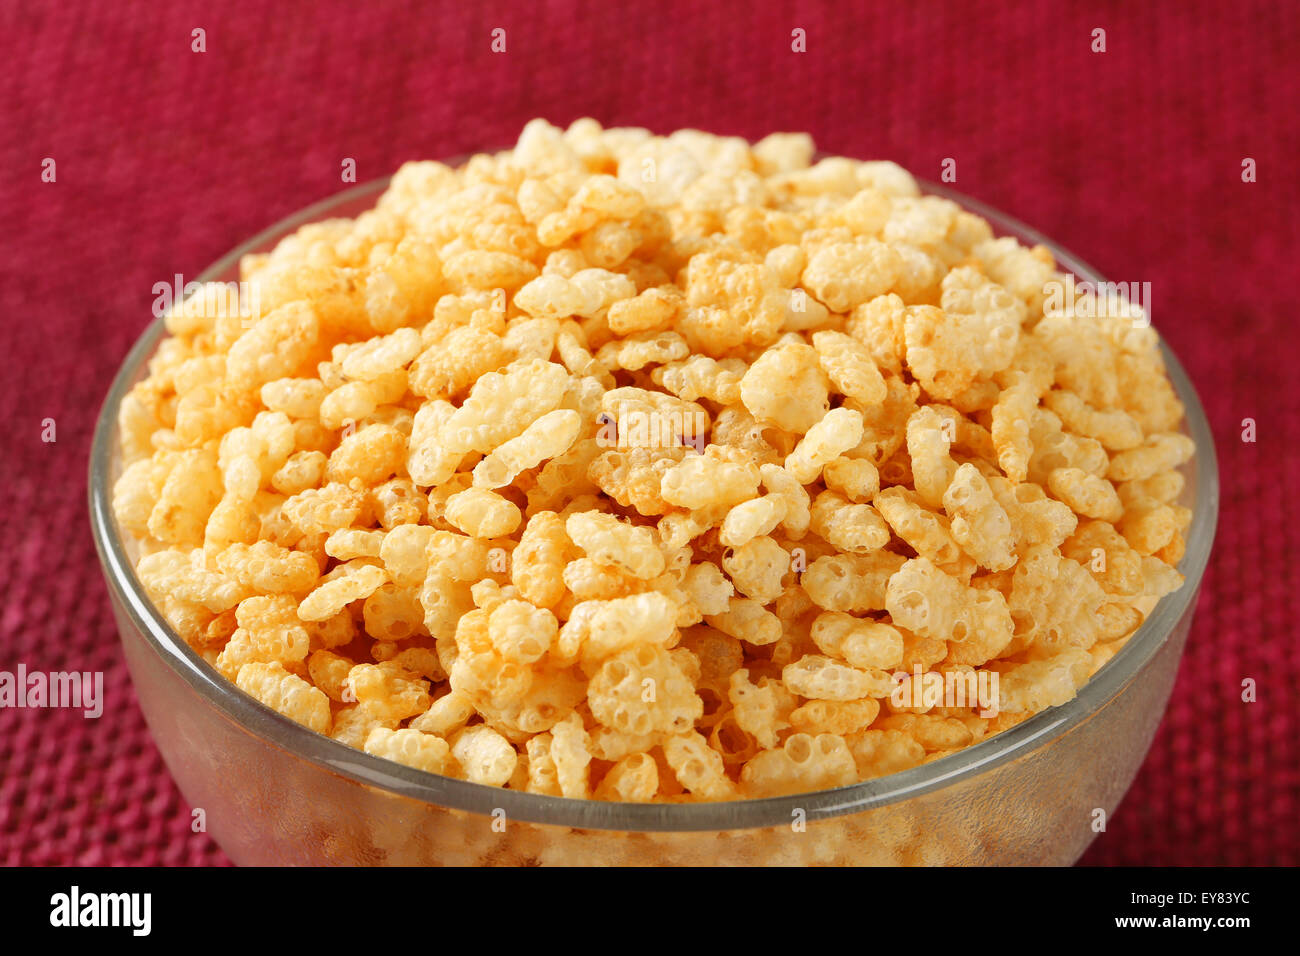 Bowl of toasted rice cereal Stock Photo